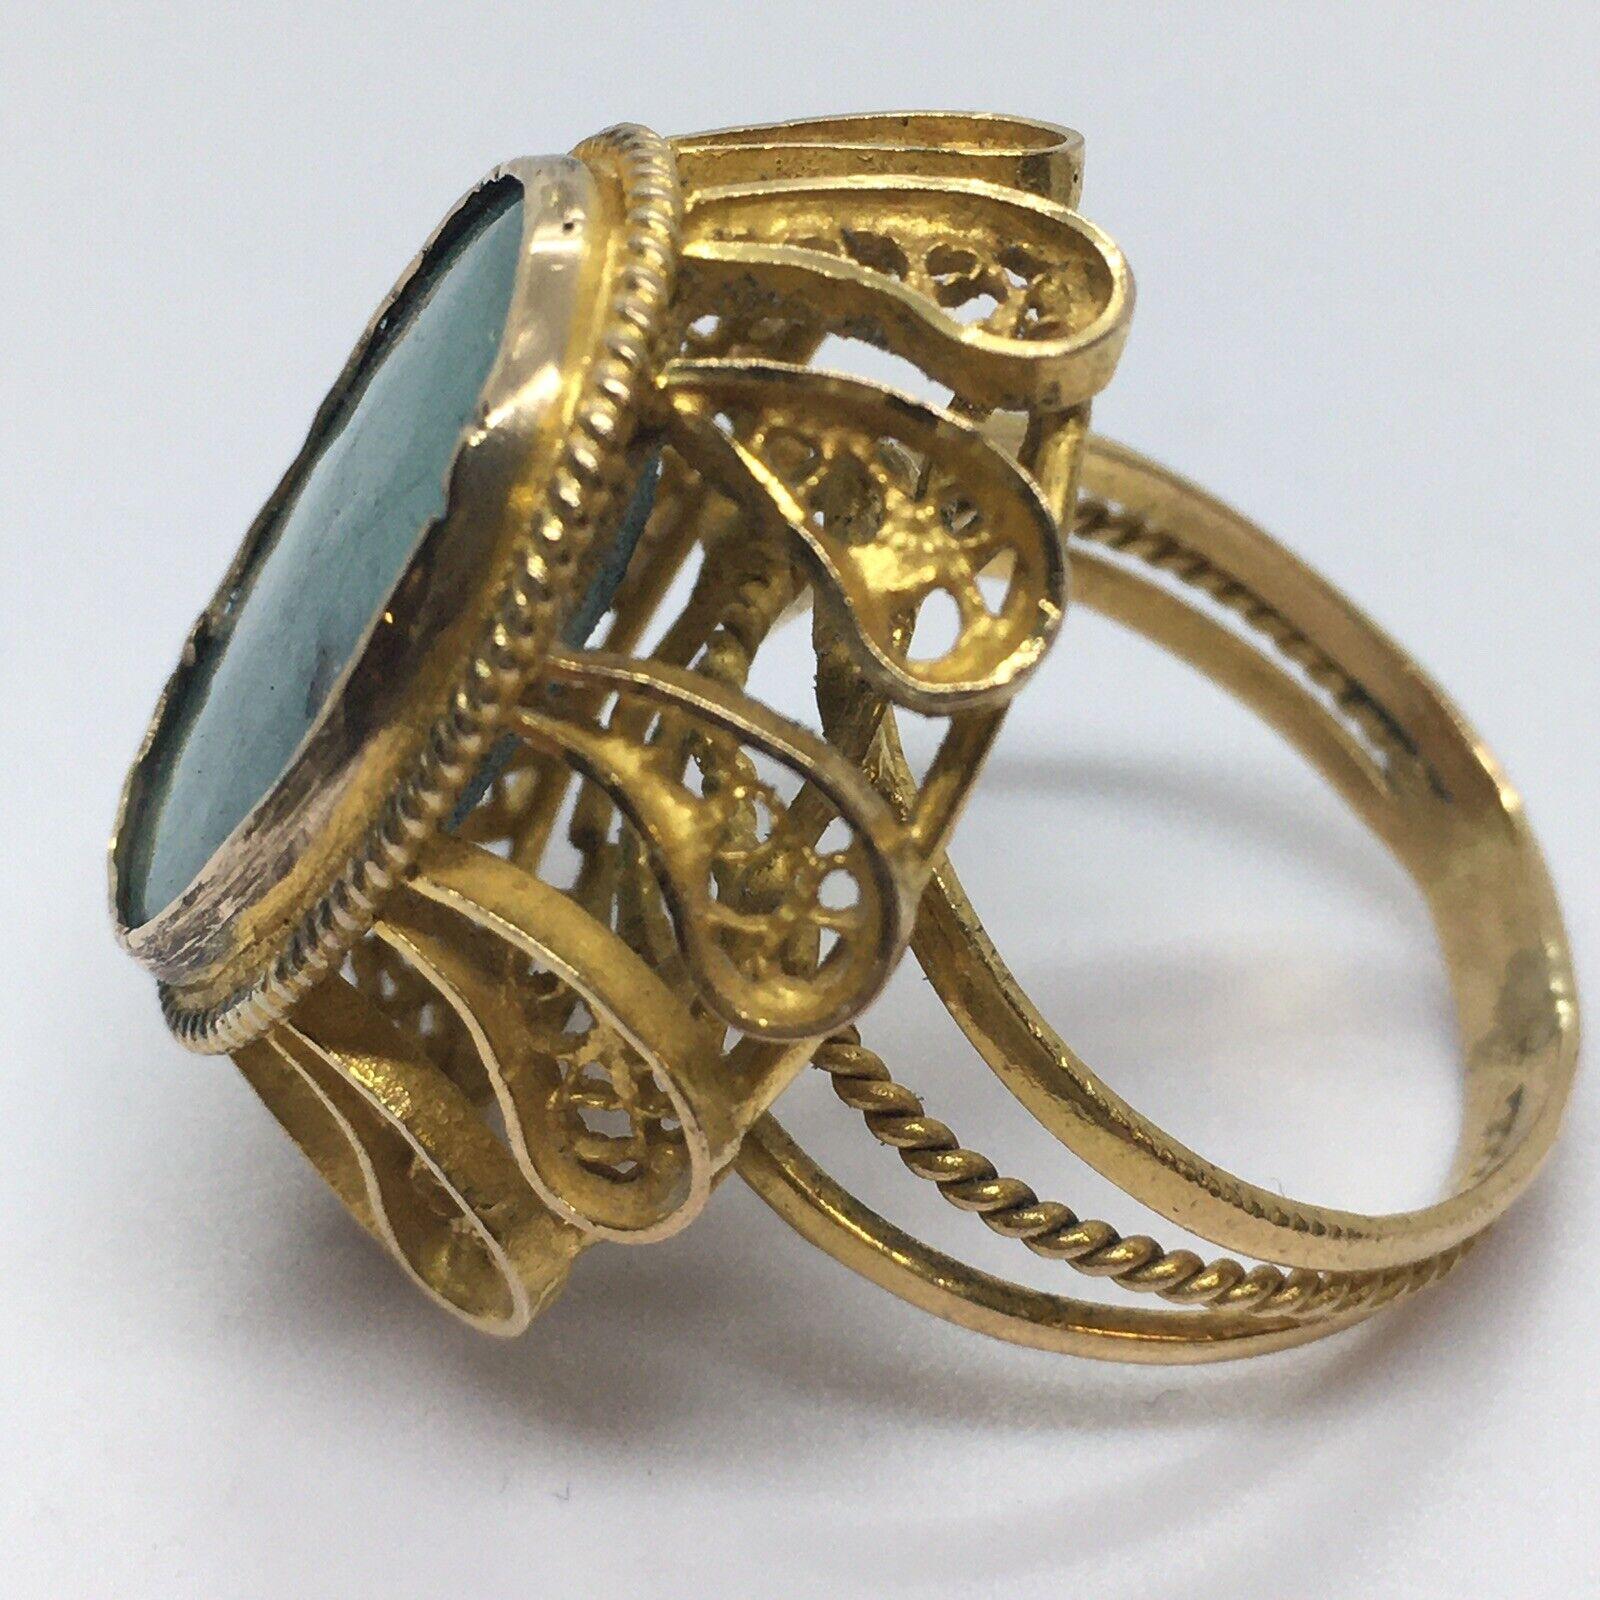 18k Yellow Gold Filigree Natural Turquoise Ring 30 mm Top 12.8 gram size 7



Size: 7 
Weight: 12.8 gram
Measurement 30 mm top north south side, bottom shank 4 mm
Stone Measurement  Natural Turquoise 21 mm by 16mm
Shape: Openwork tapered shank